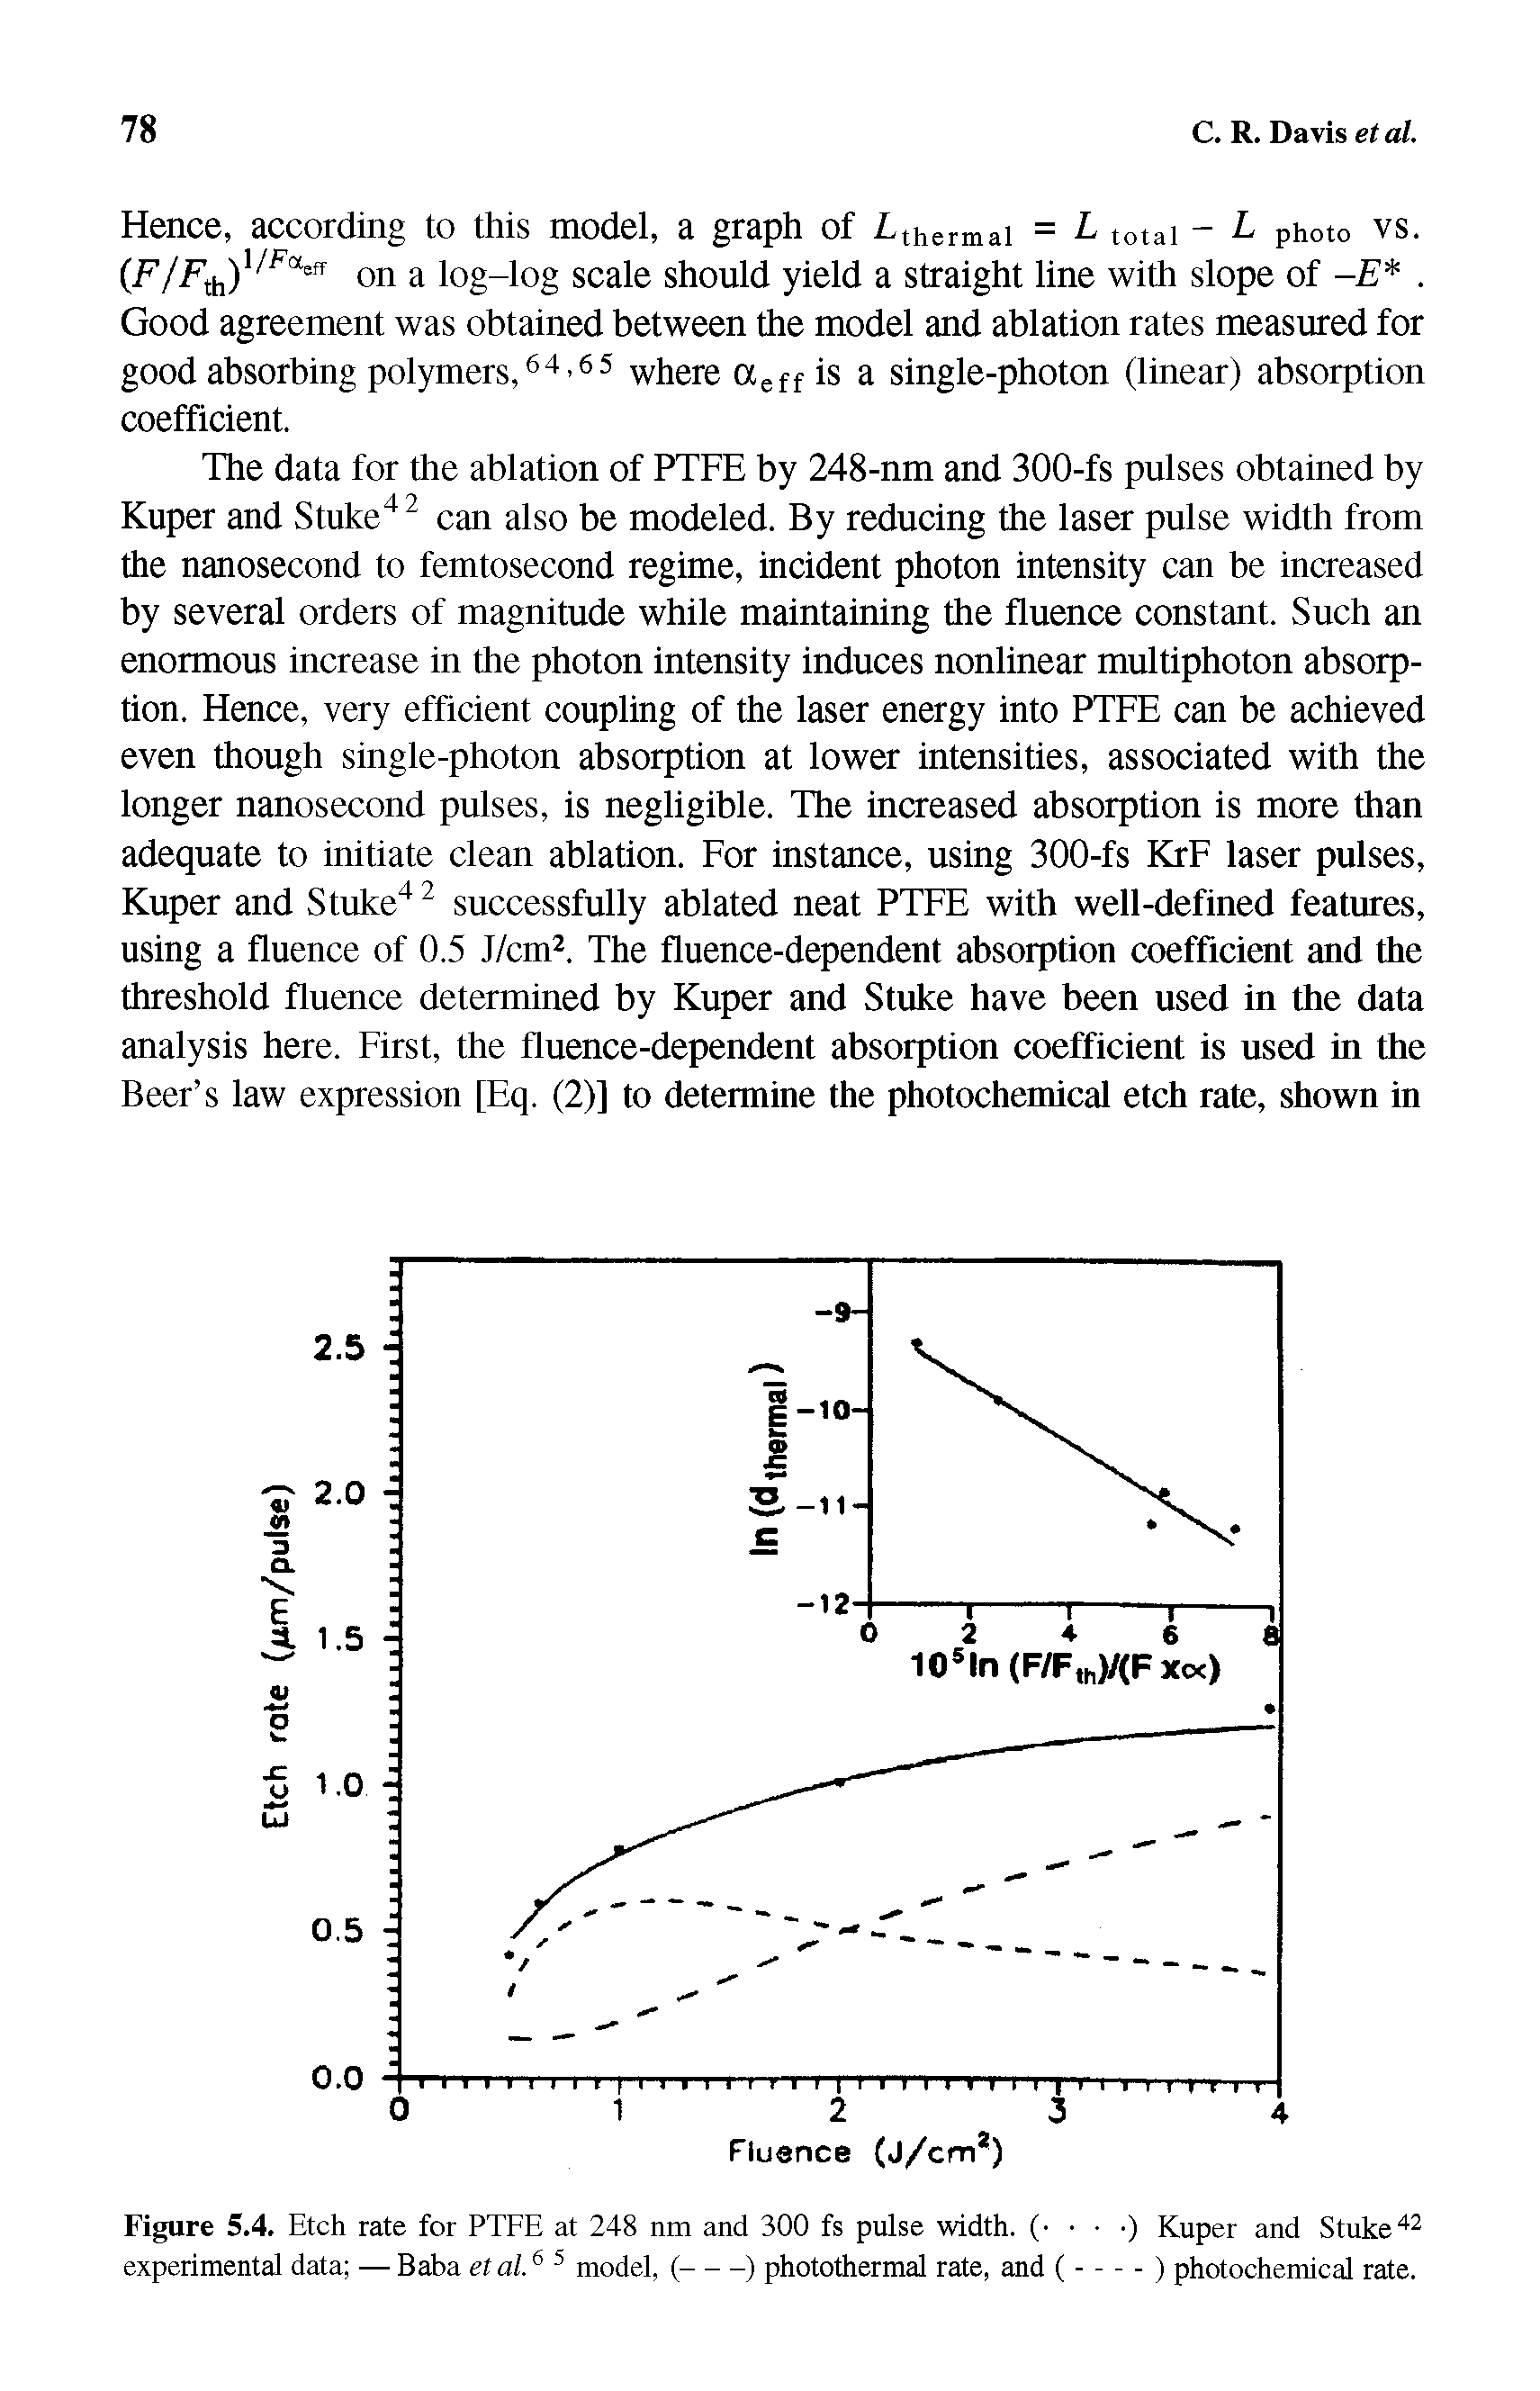 Figure 5.4. Etch rate for PTFE at 248 nm and 300 fs pulse width. ( ) Kuper and Stuke experimental data — Baba et al. model, (--) photothermal rate, and (---) photochemical rate.